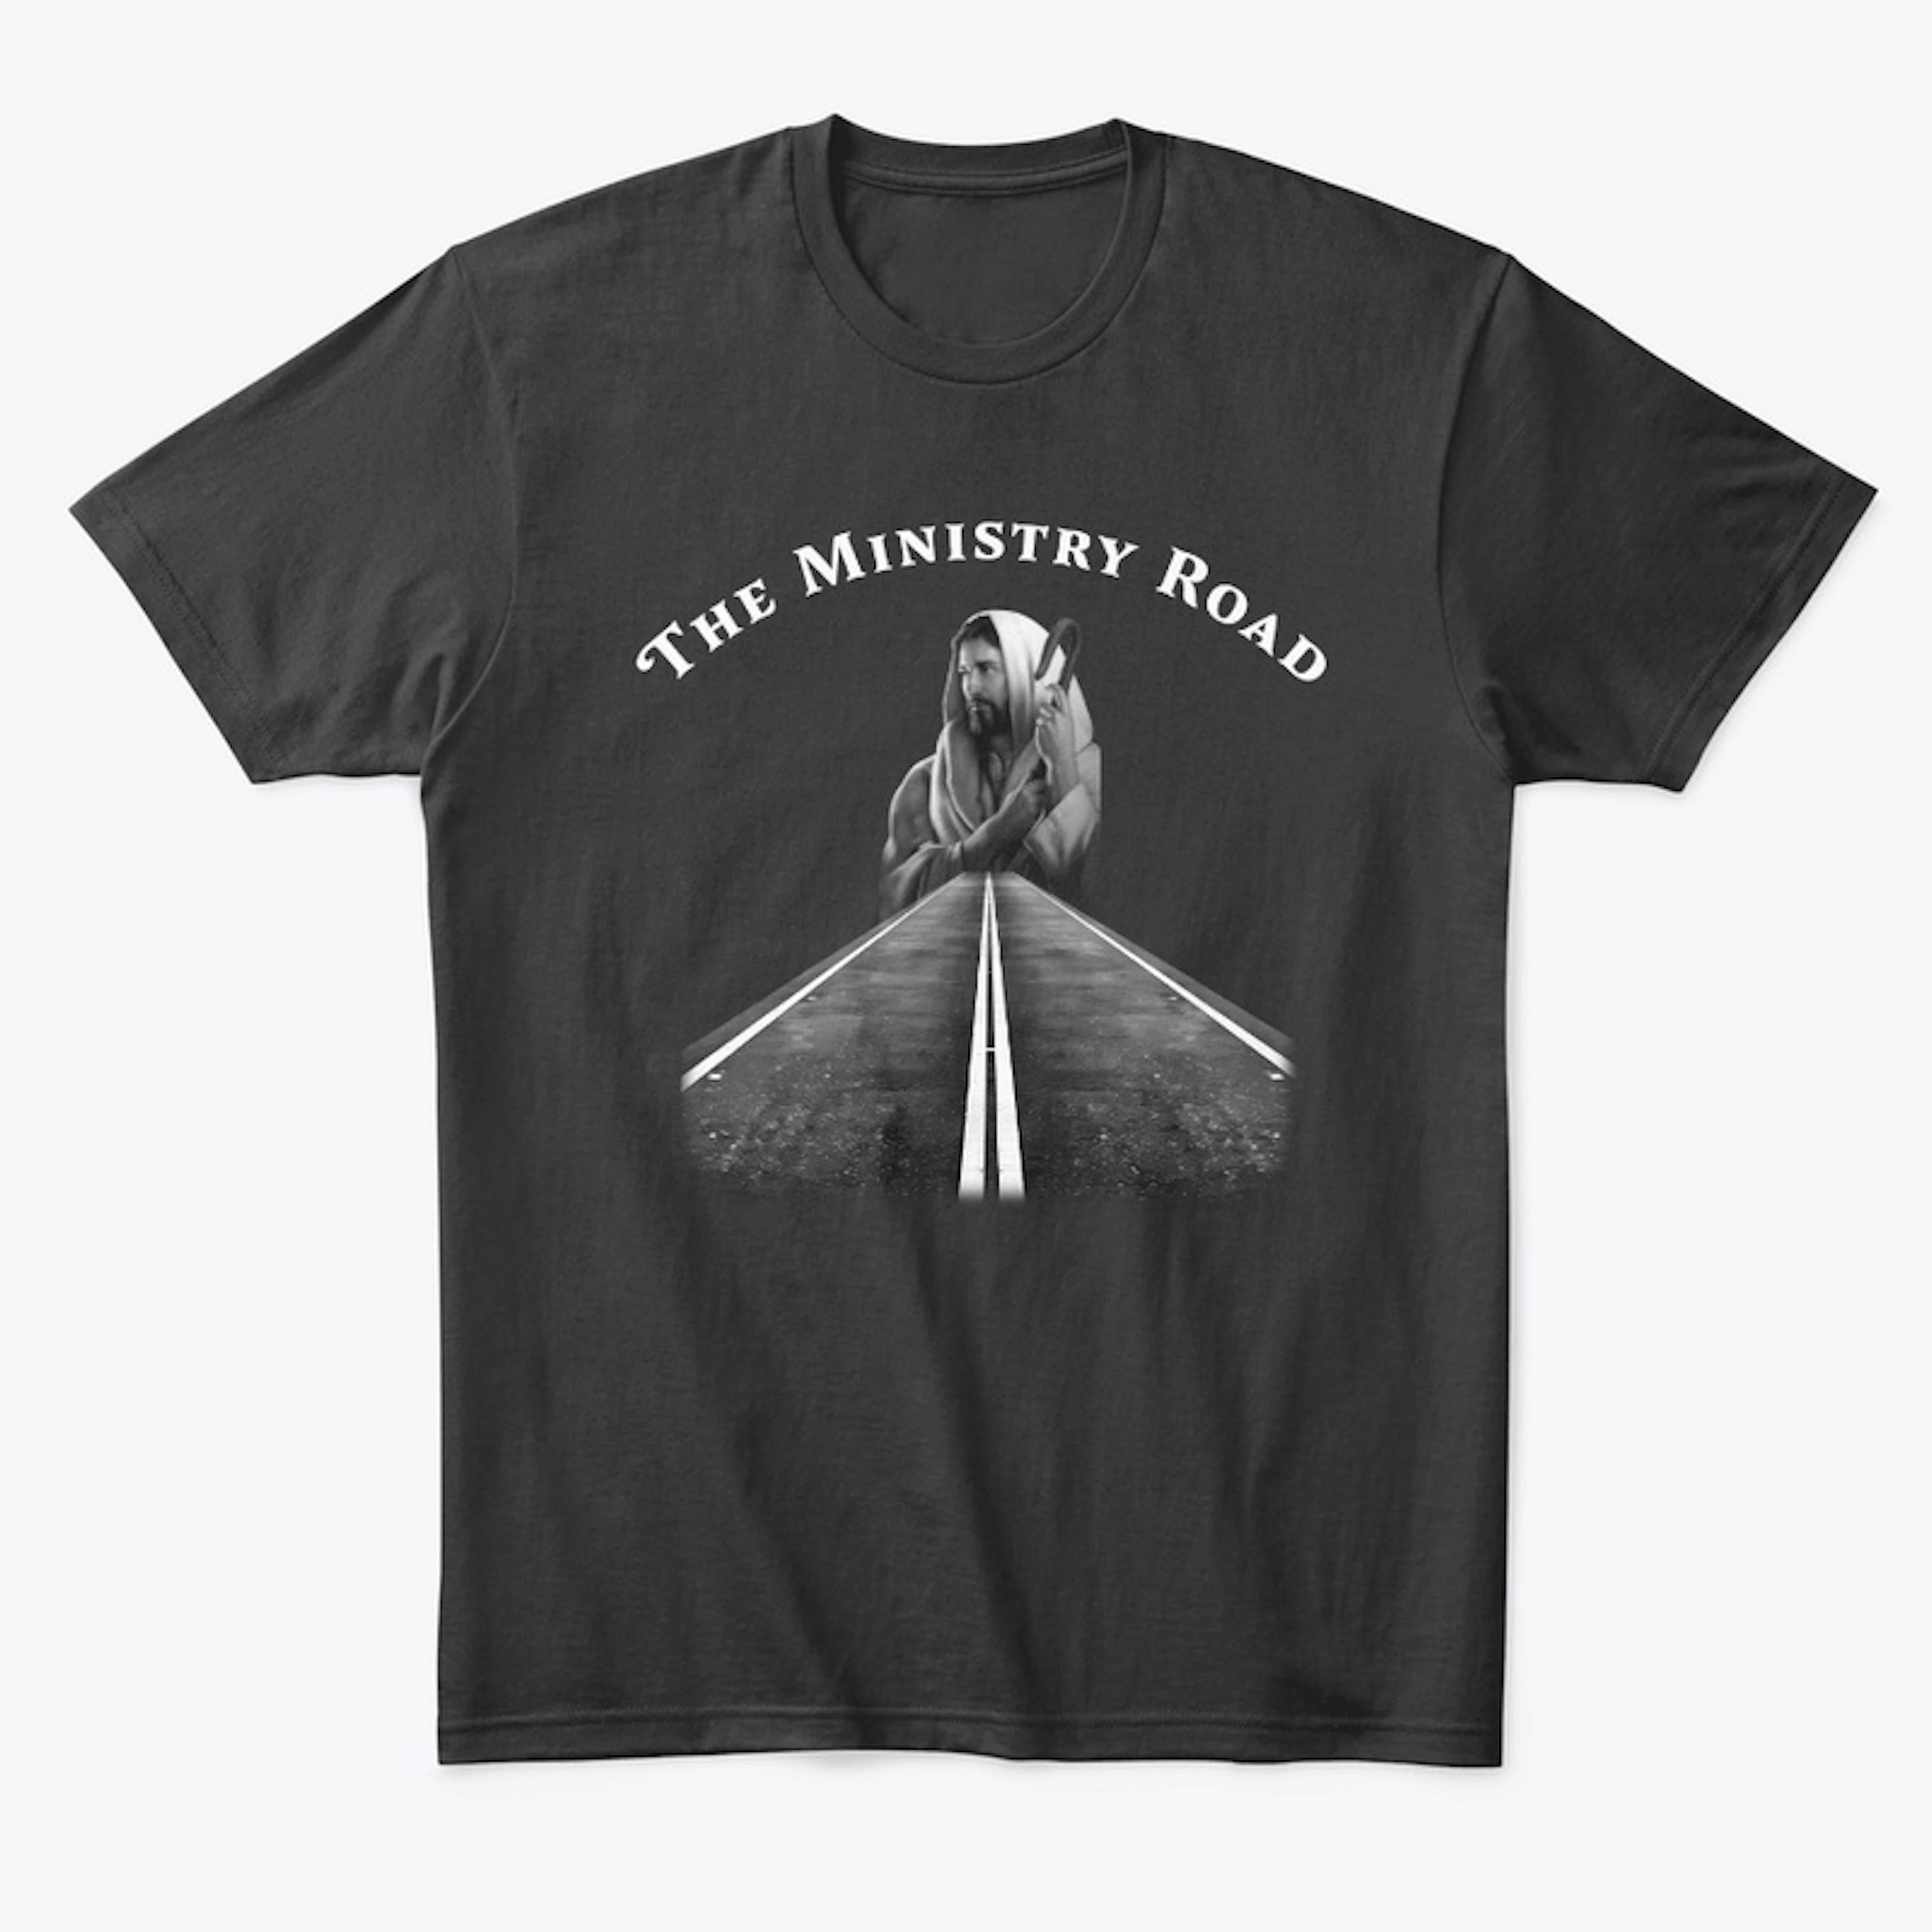 The Ministry Road T-shirt